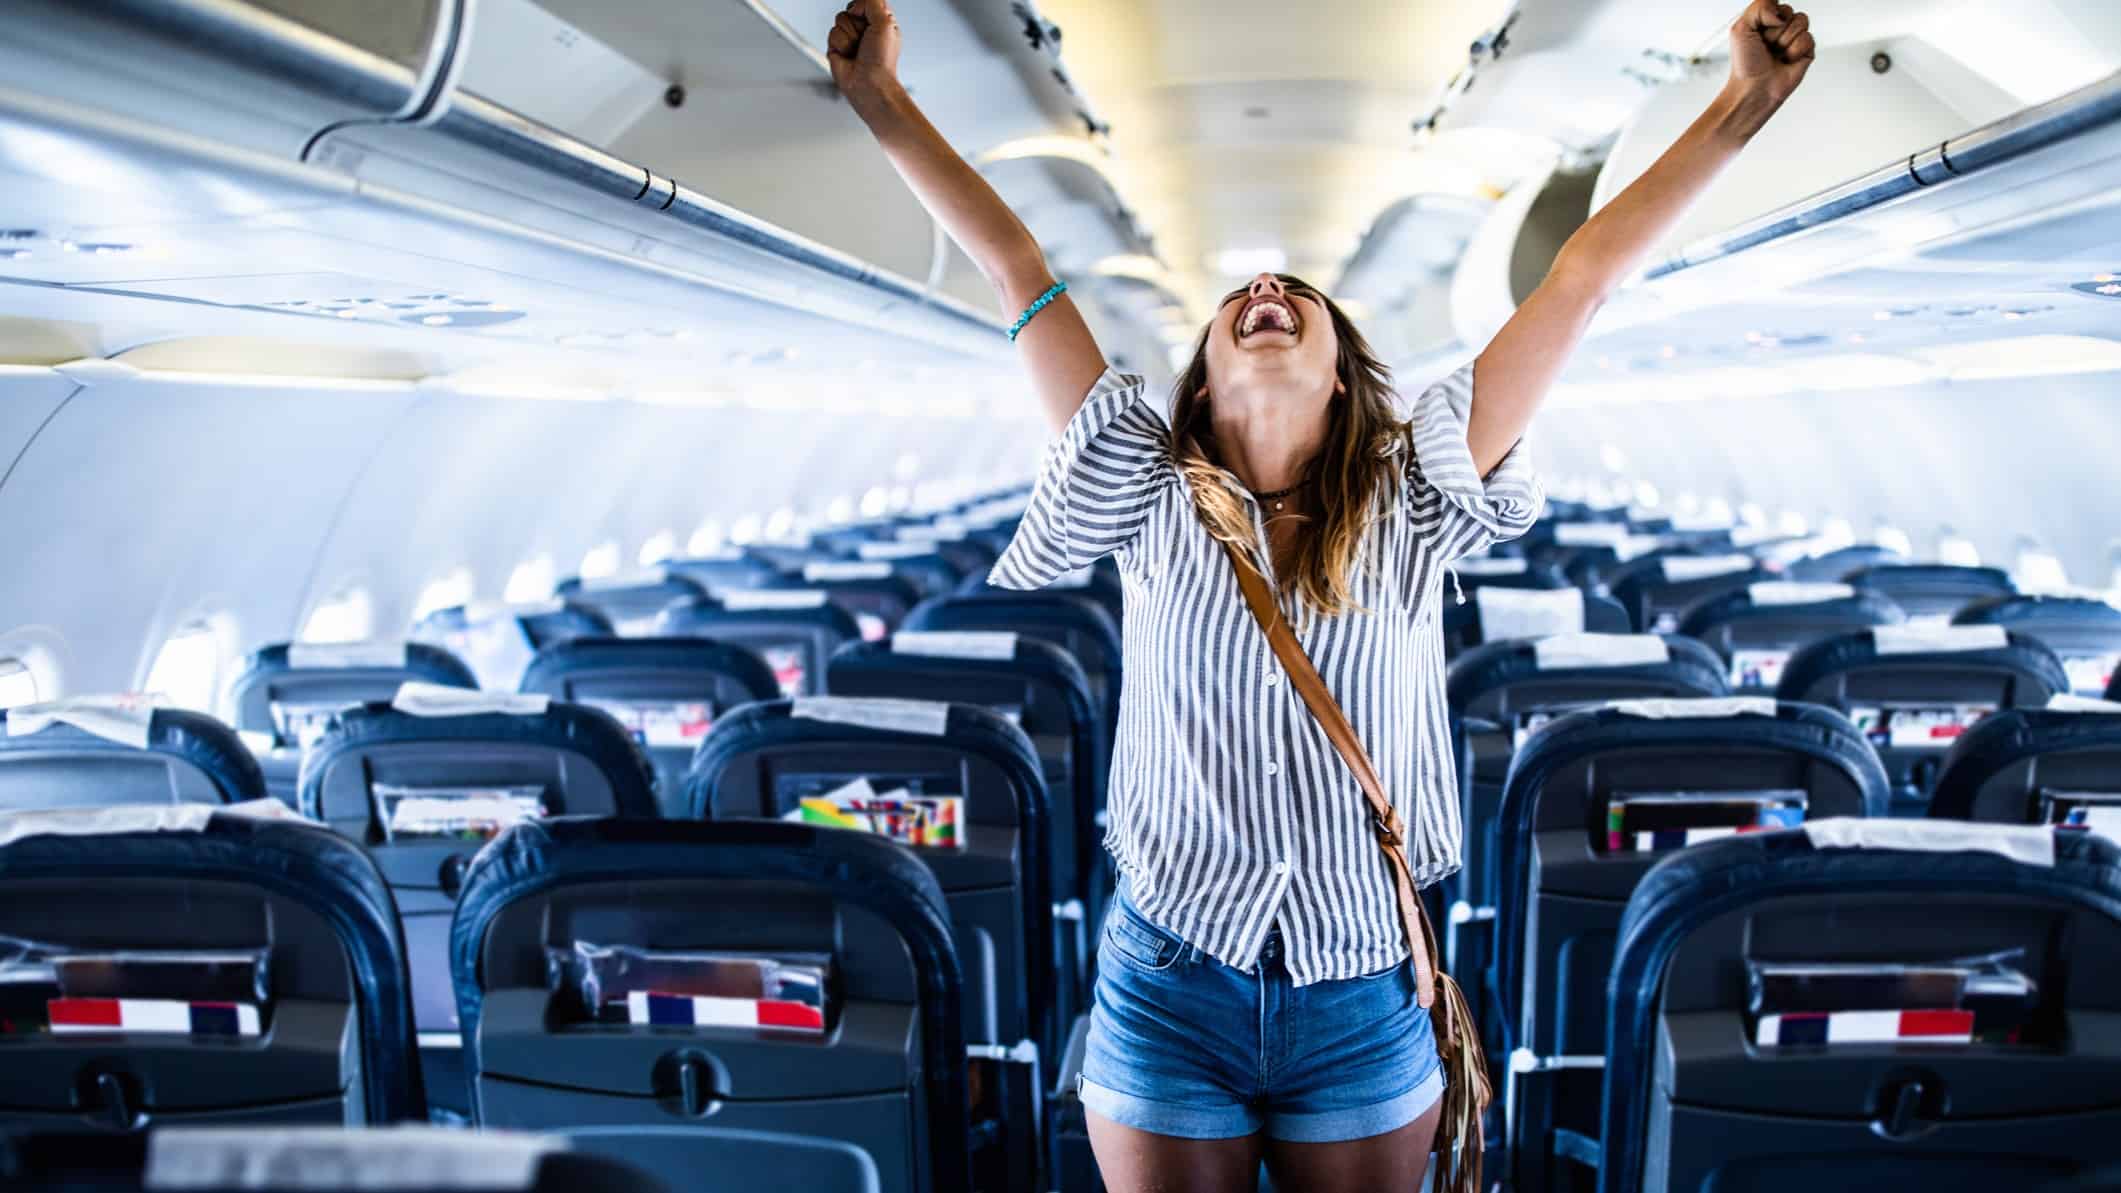 A woman wearing casual holiday attire stands with her head thrown back and her arms outstretched as if celebrating as she stands on board an empty Qantas plane with its rows of seats in the background.